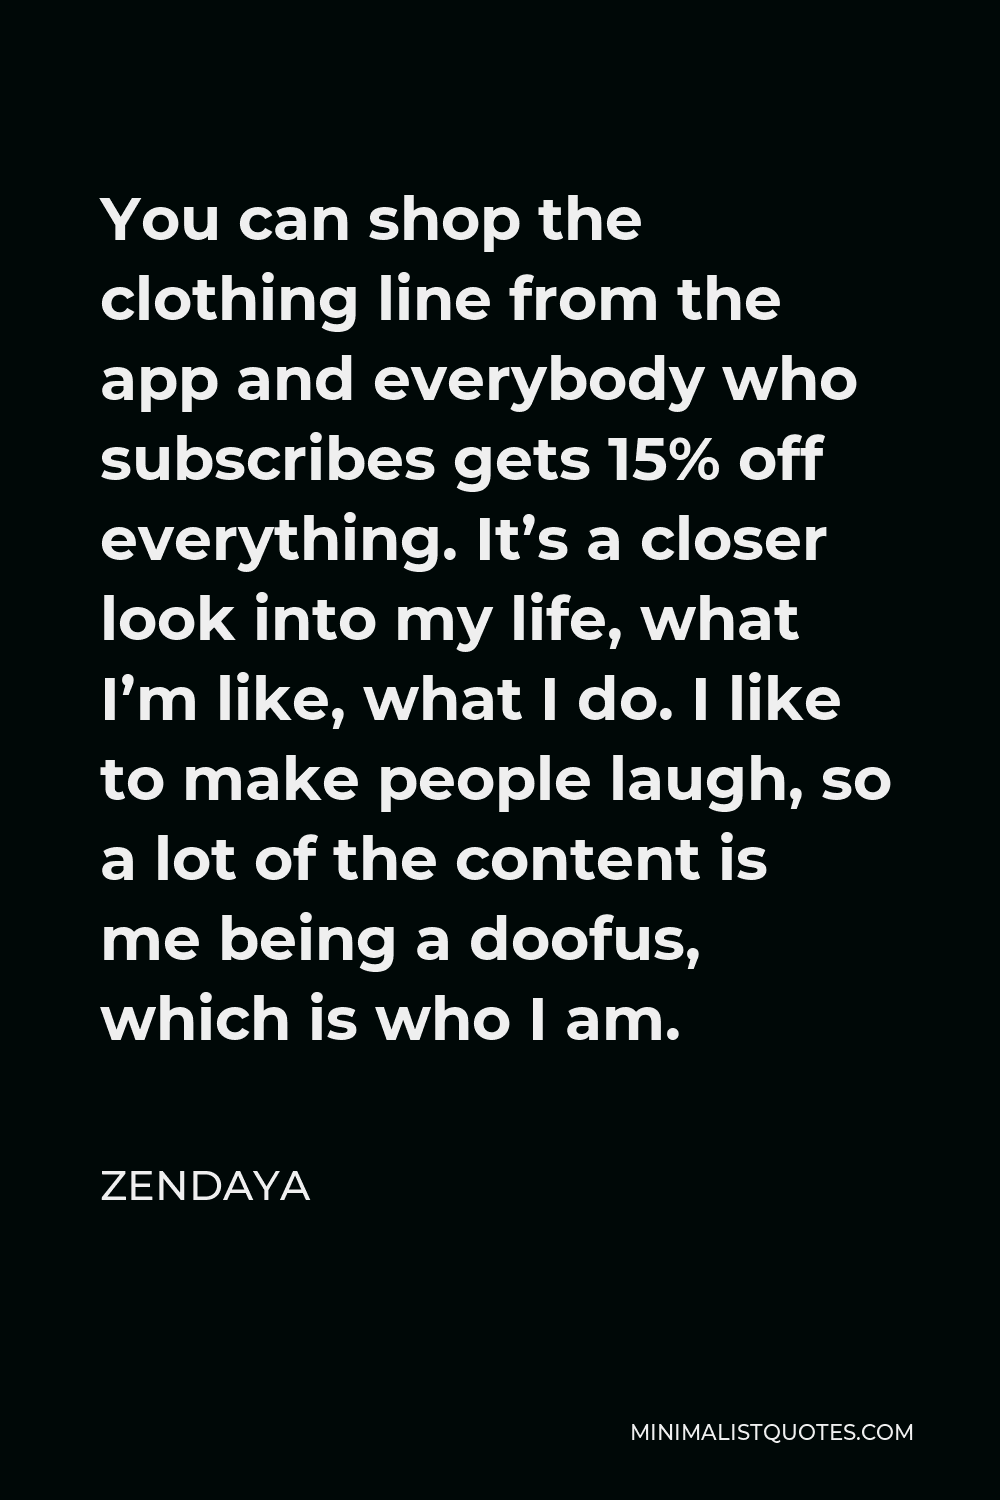 Zendaya Quote - You can shop the clothing line from the app and everybody who subscribes gets 15% off everything. It’s a closer look into my life, what I’m like, what I do. I like to make people laugh, so a lot of the content is me being a doofus, which is who I am.